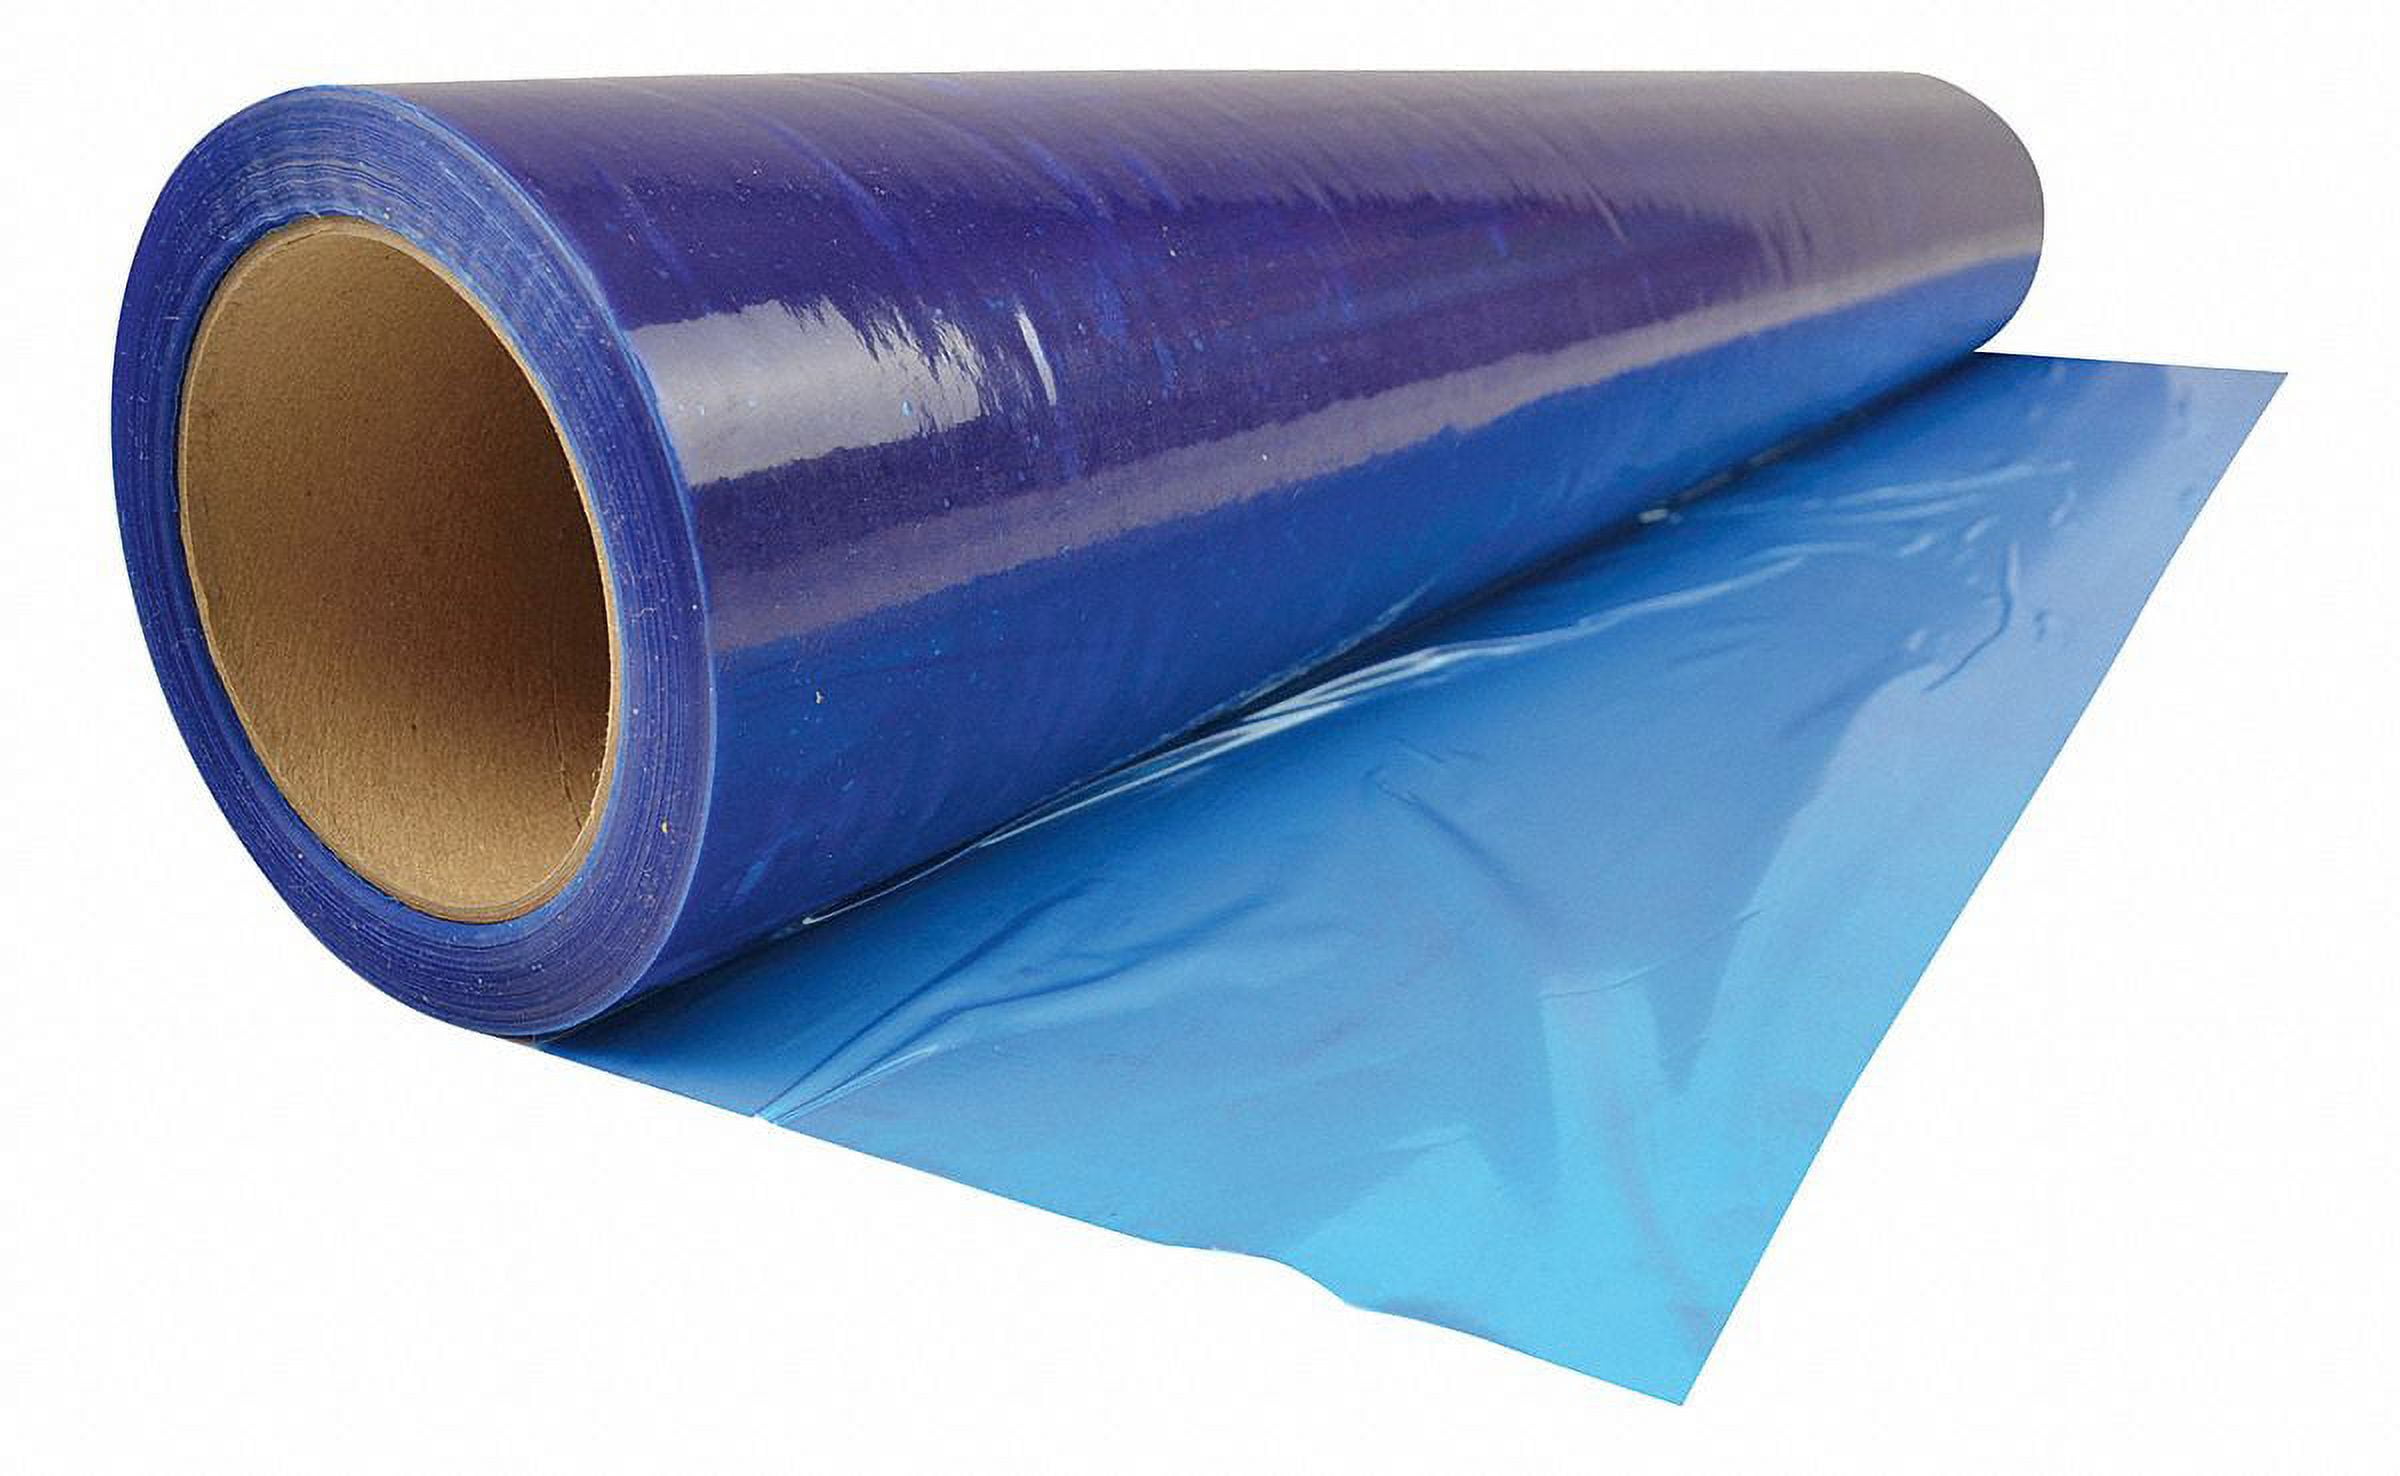 Frost King® V54184 Crystal Clear Vinyl Sheeting / Surface